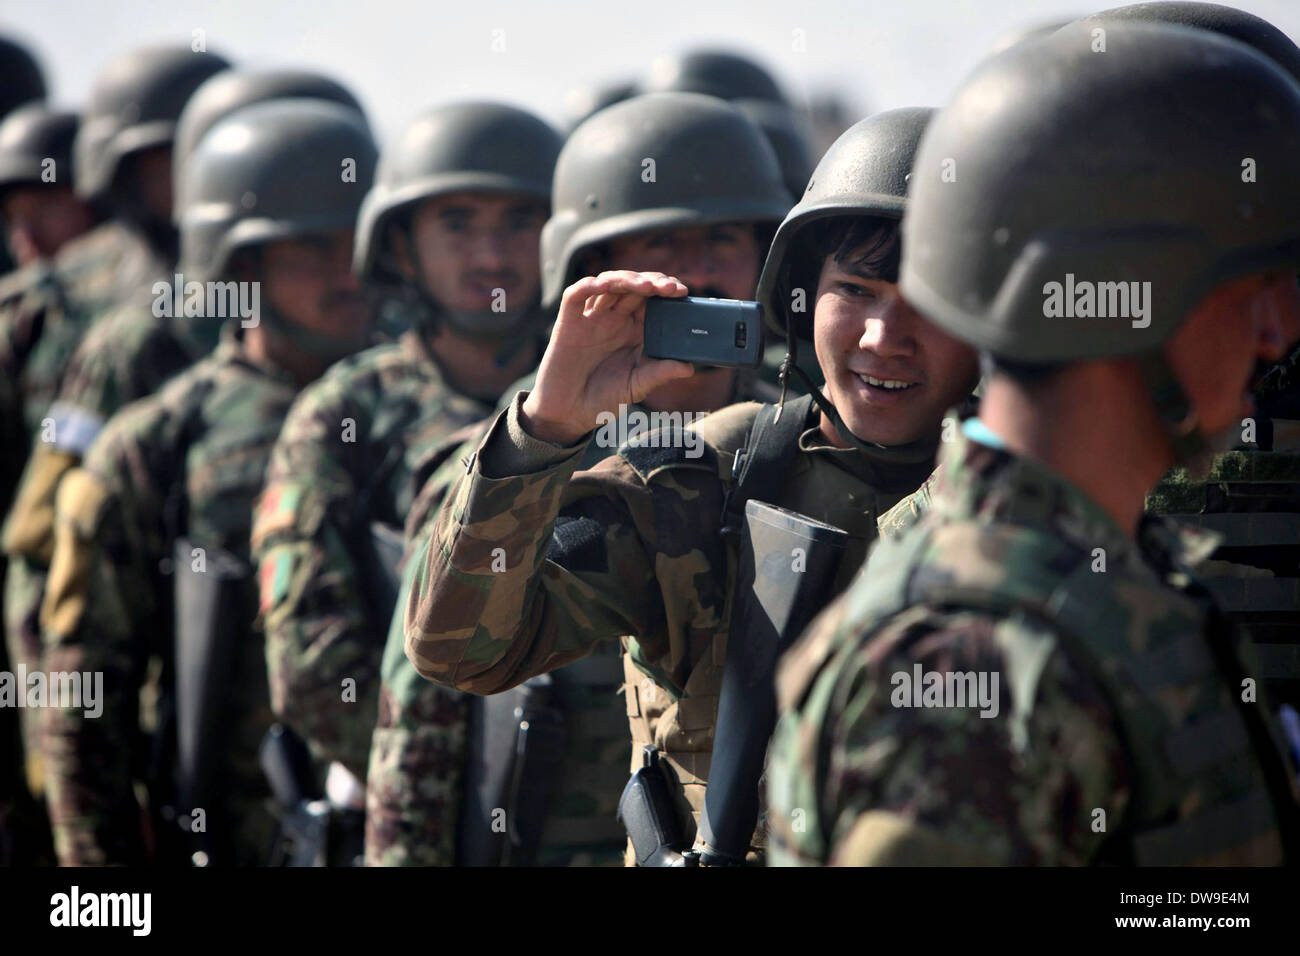 A soldier with the Afghan National Army snaps a photo of an Mi-17 helicopter with his cell phone during a training exercise February 19, 2014 at Camp Shorabak, Helmand province, Afghanistan. Stock Photo